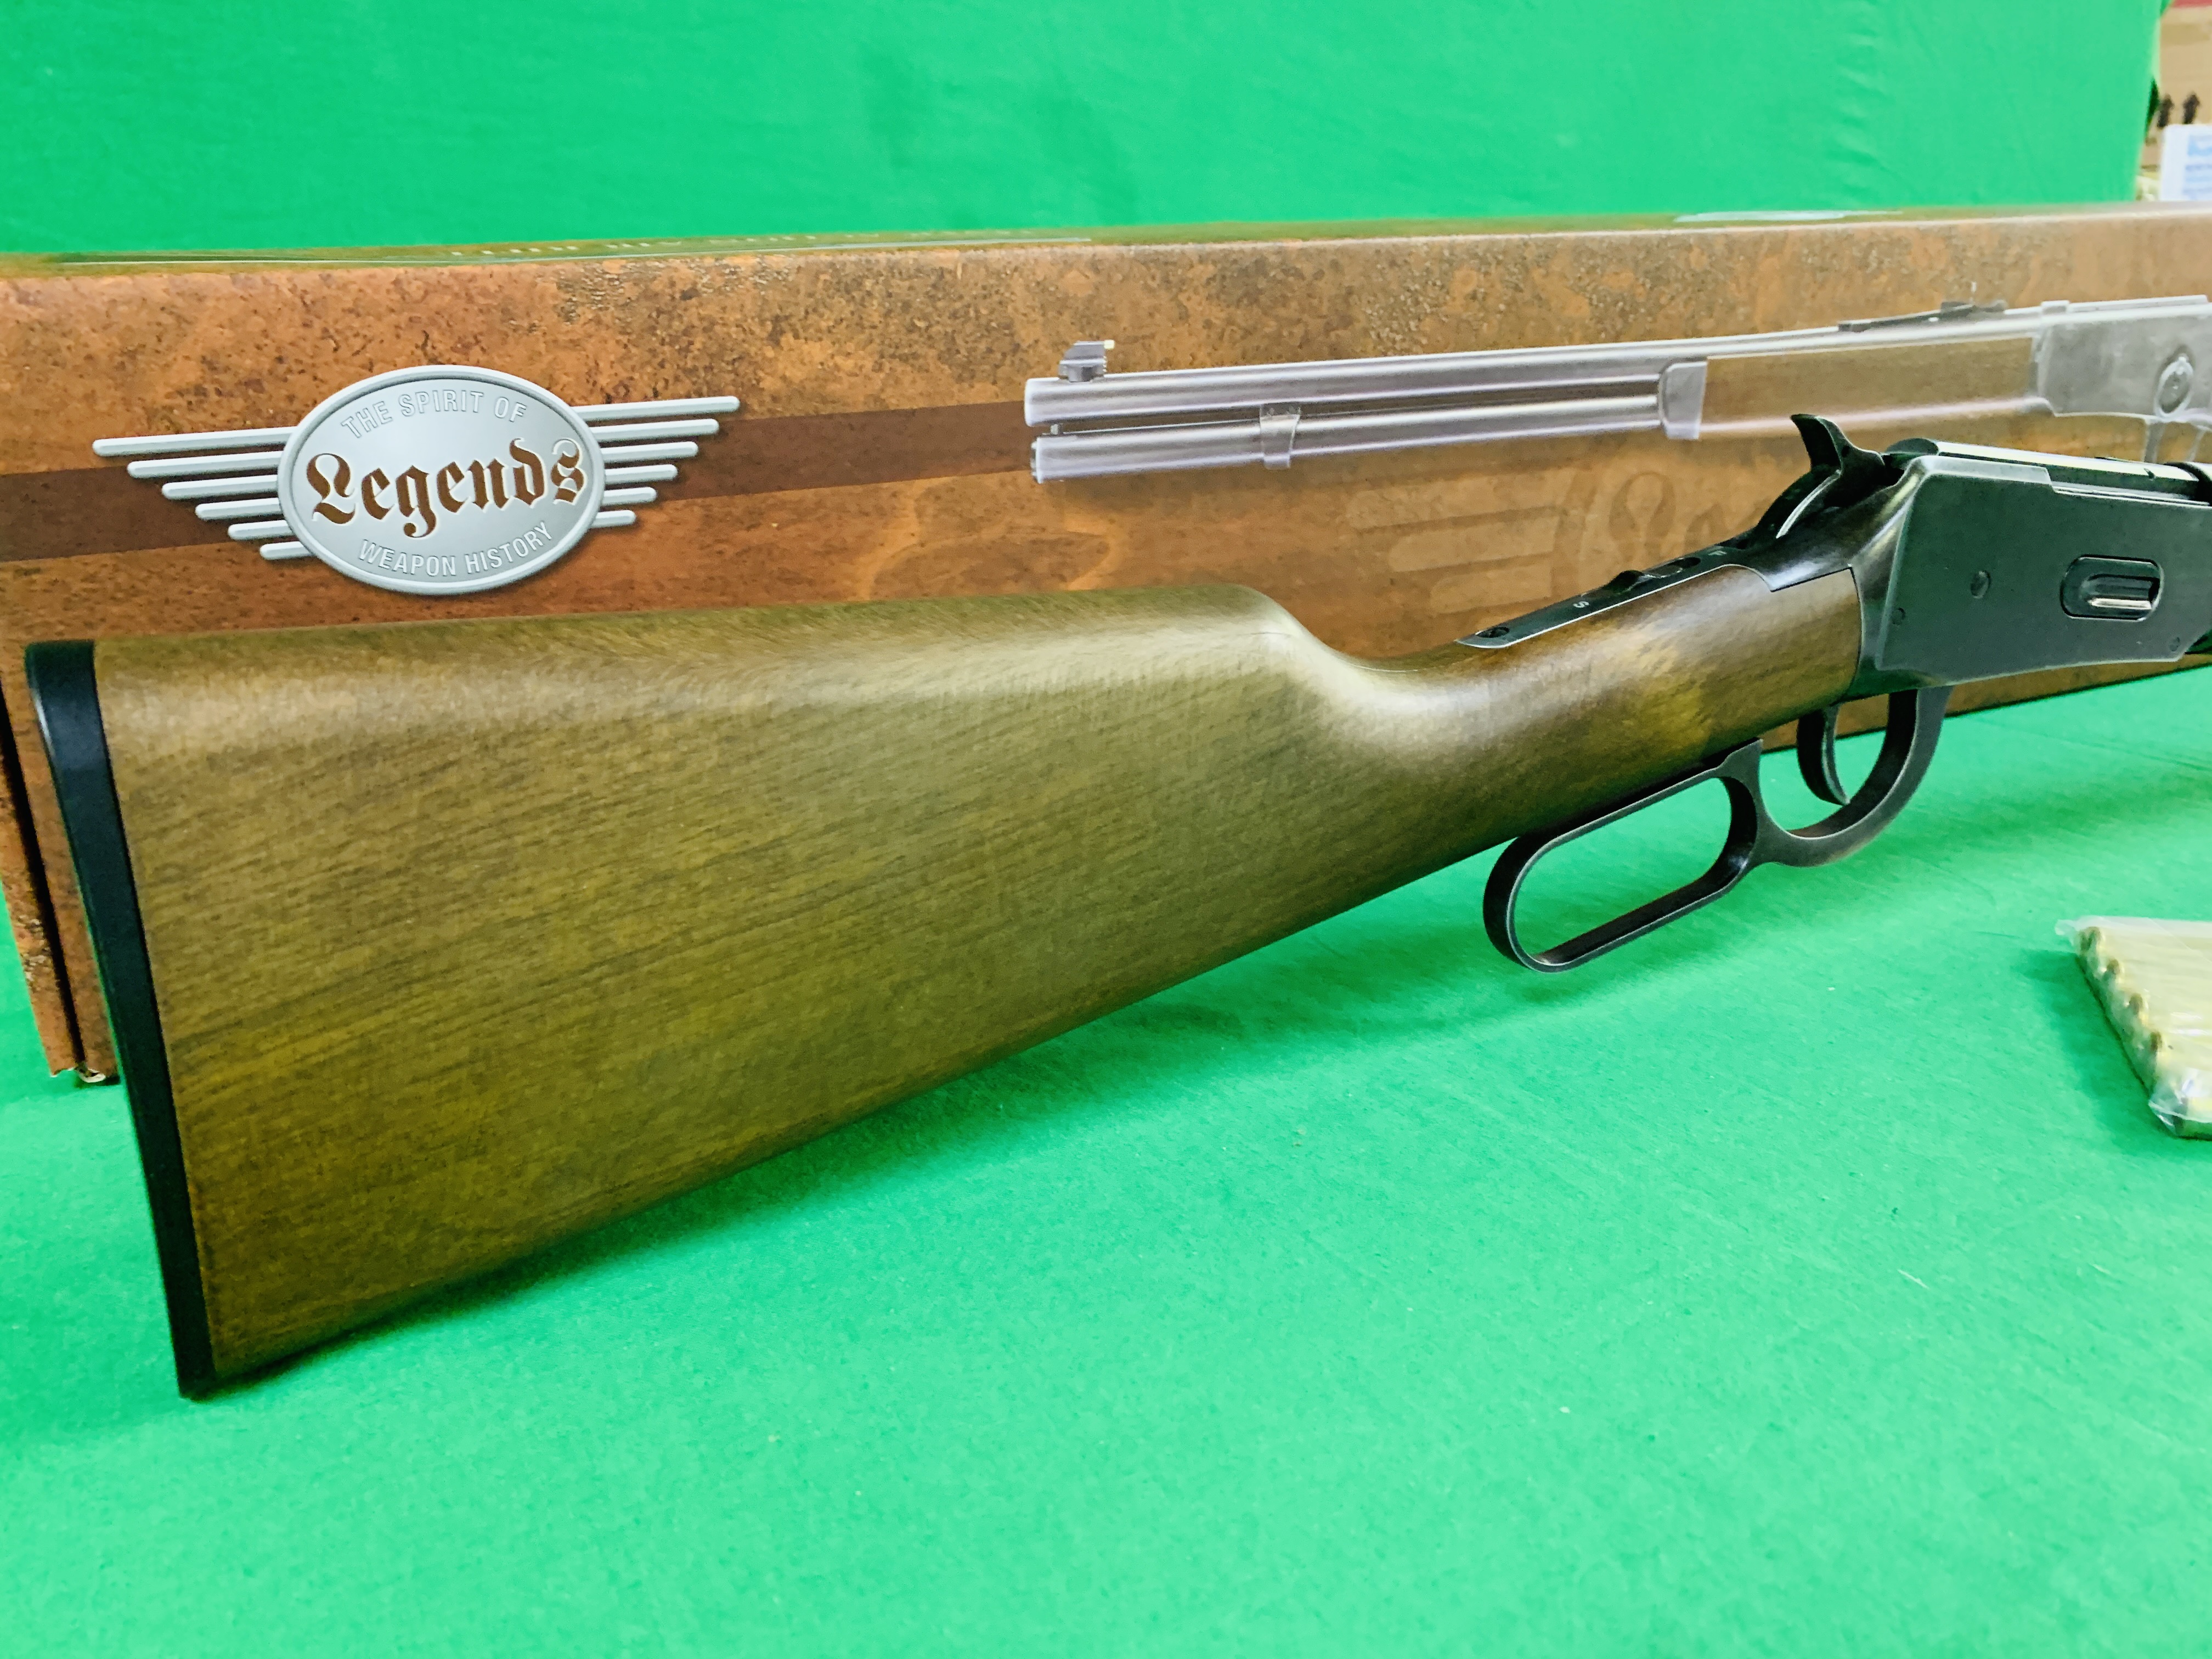 A UMAREX LEGENDS COWBOY RIFLE CO² AIR GUN 10 ROUND CAPACITY LEVER ACTION BOXED AS NEW - (ALL GUNS - Image 6 of 9